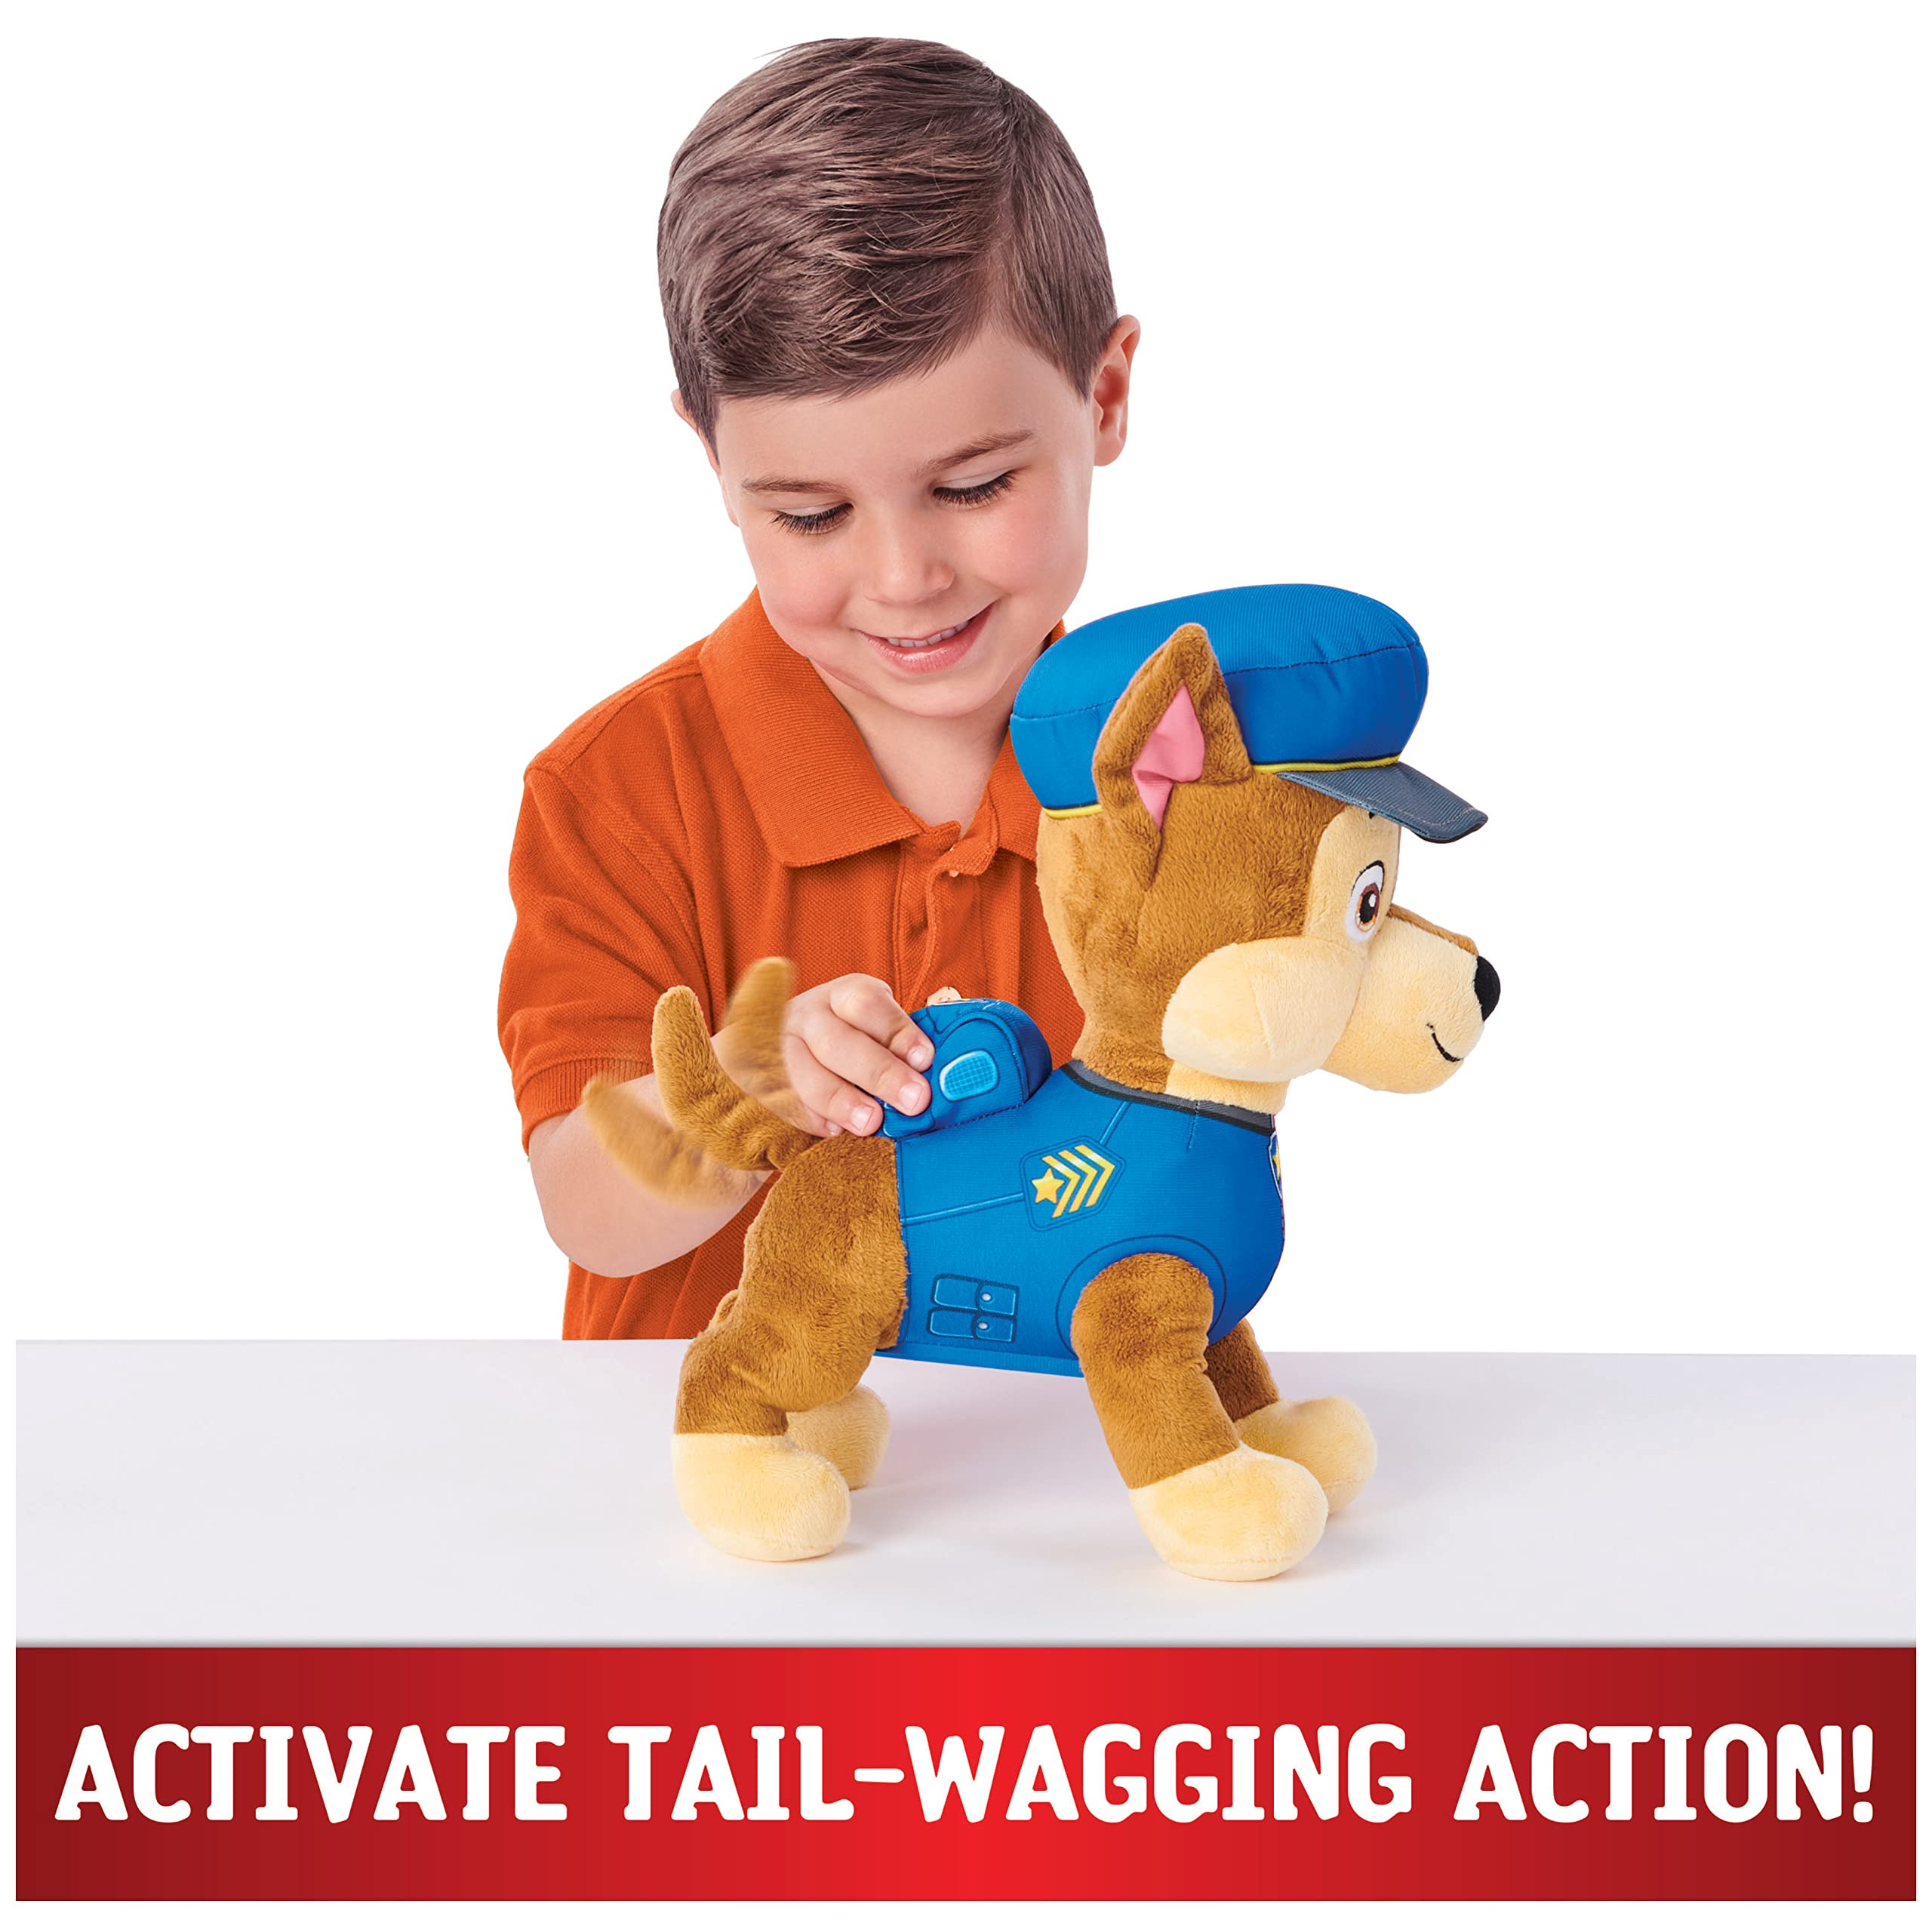 Paw Patrol, Talking Chase 12-Inch-Tall Interactive Plush Toys with Sounds, Phrases and Wagging Tail, Stuffed Animals, Kids Toys for Ages 3 and up